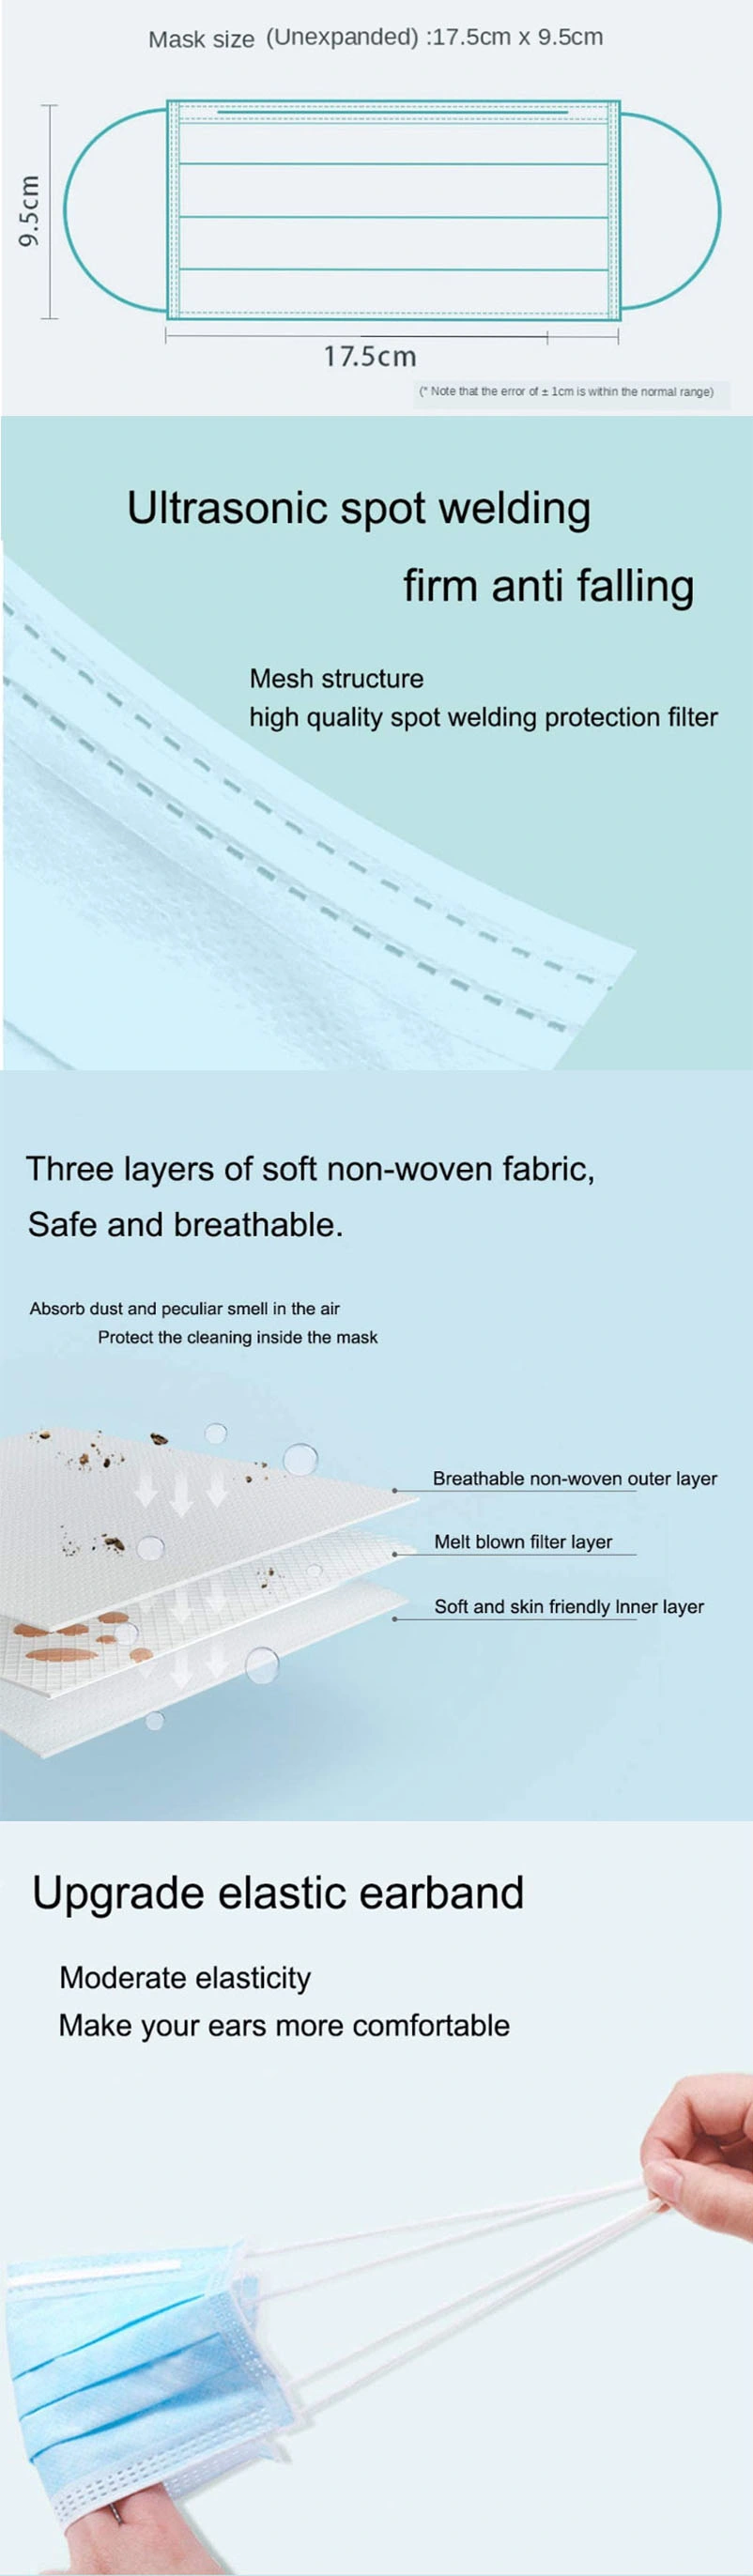 Disposable with 3-Layers of Fusible Spray Cloth, Anti-Dust and Breathable Face Mask.